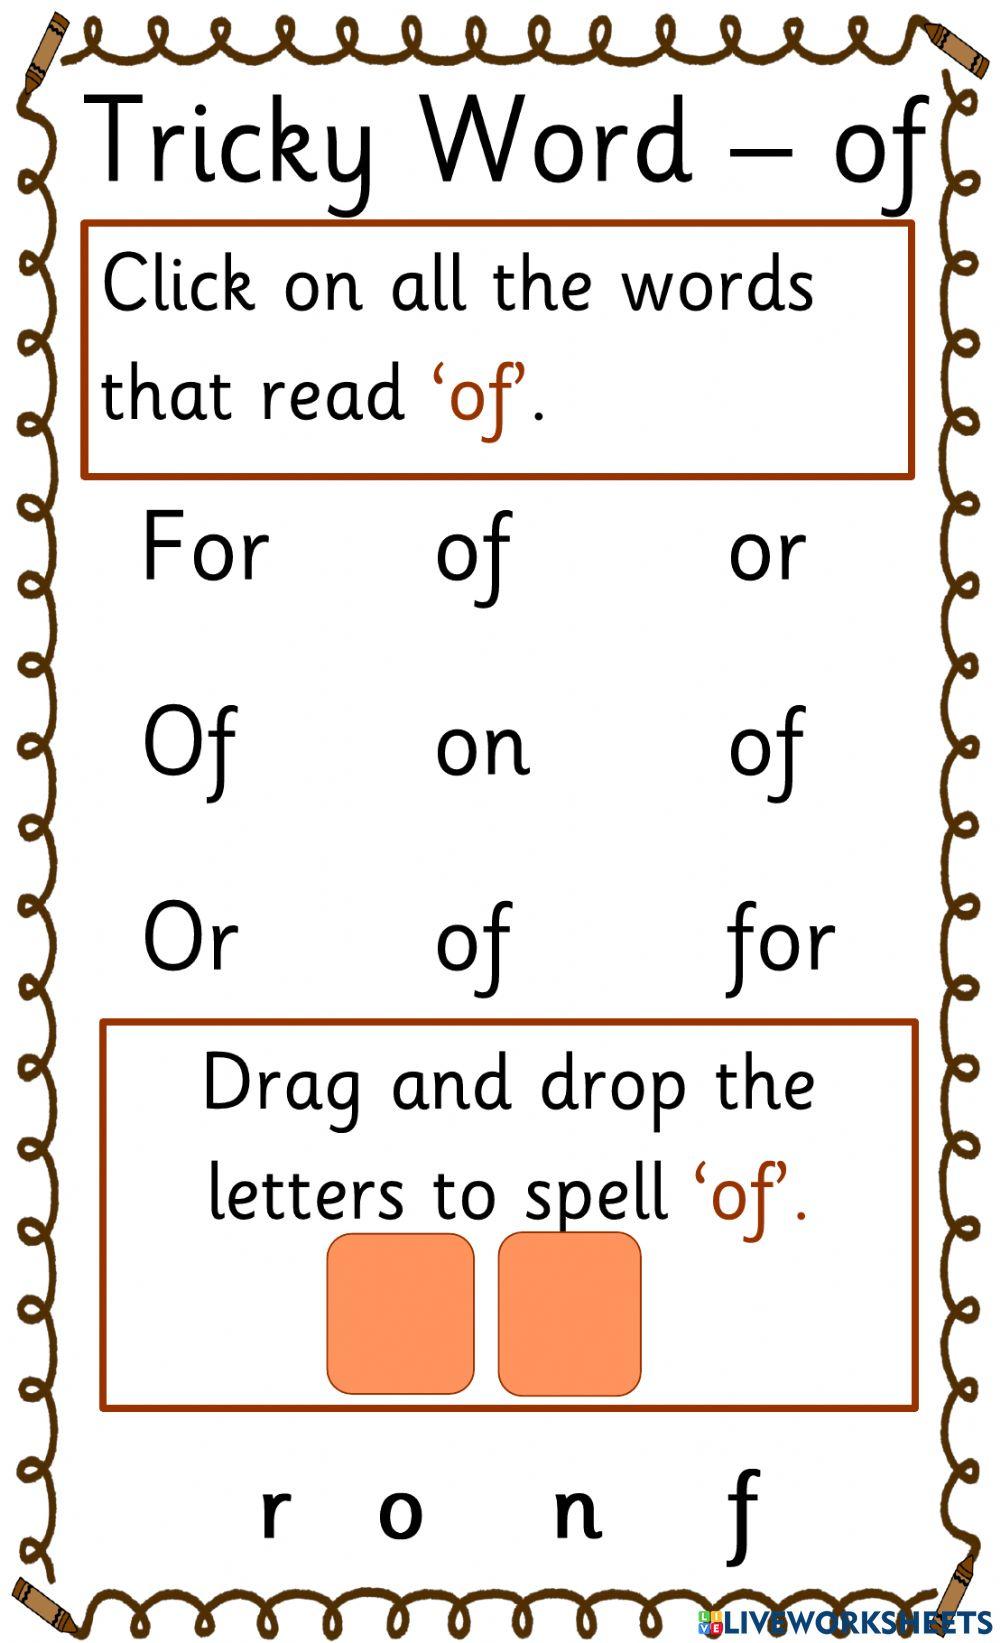 Tricky Word - of